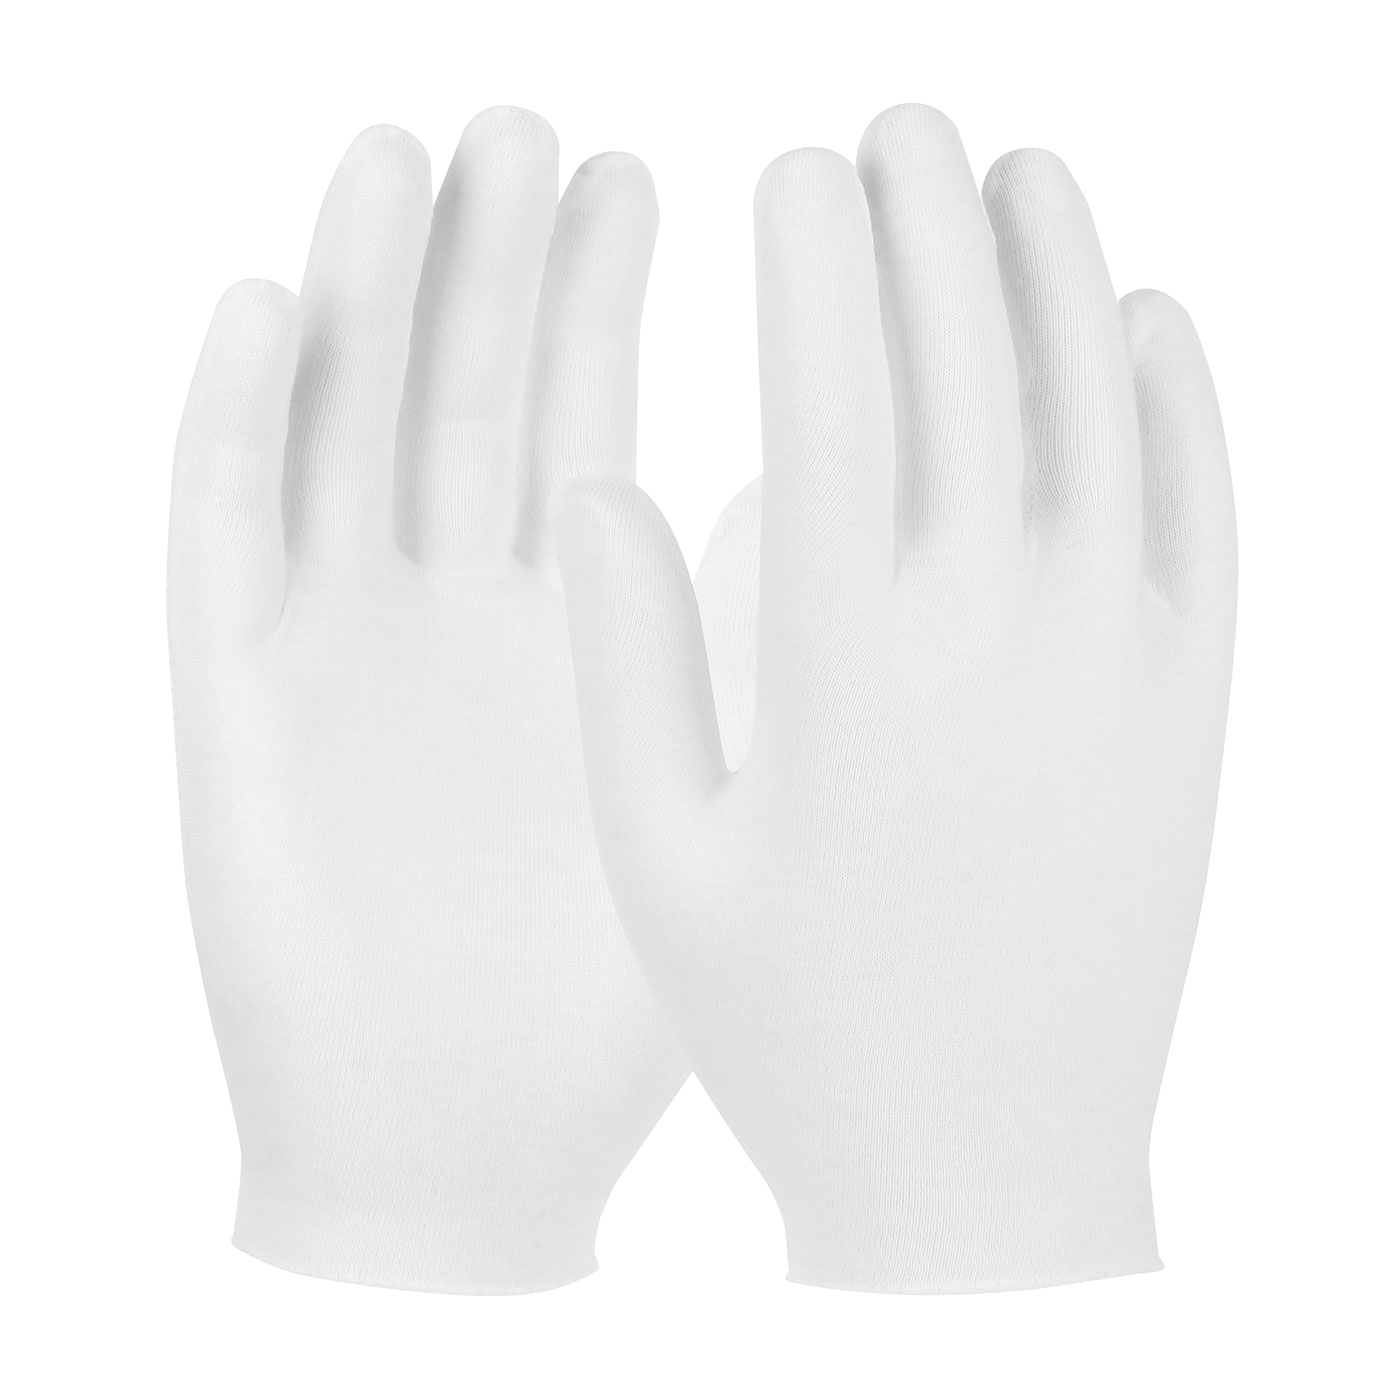 PIP® CleanTeam® 97-521 Ladies Medium Weight Premium Grade Reversible Inspection Gloves, Universal, Cotton, White, Seamless Style, Paired Hand, 8.7 in L